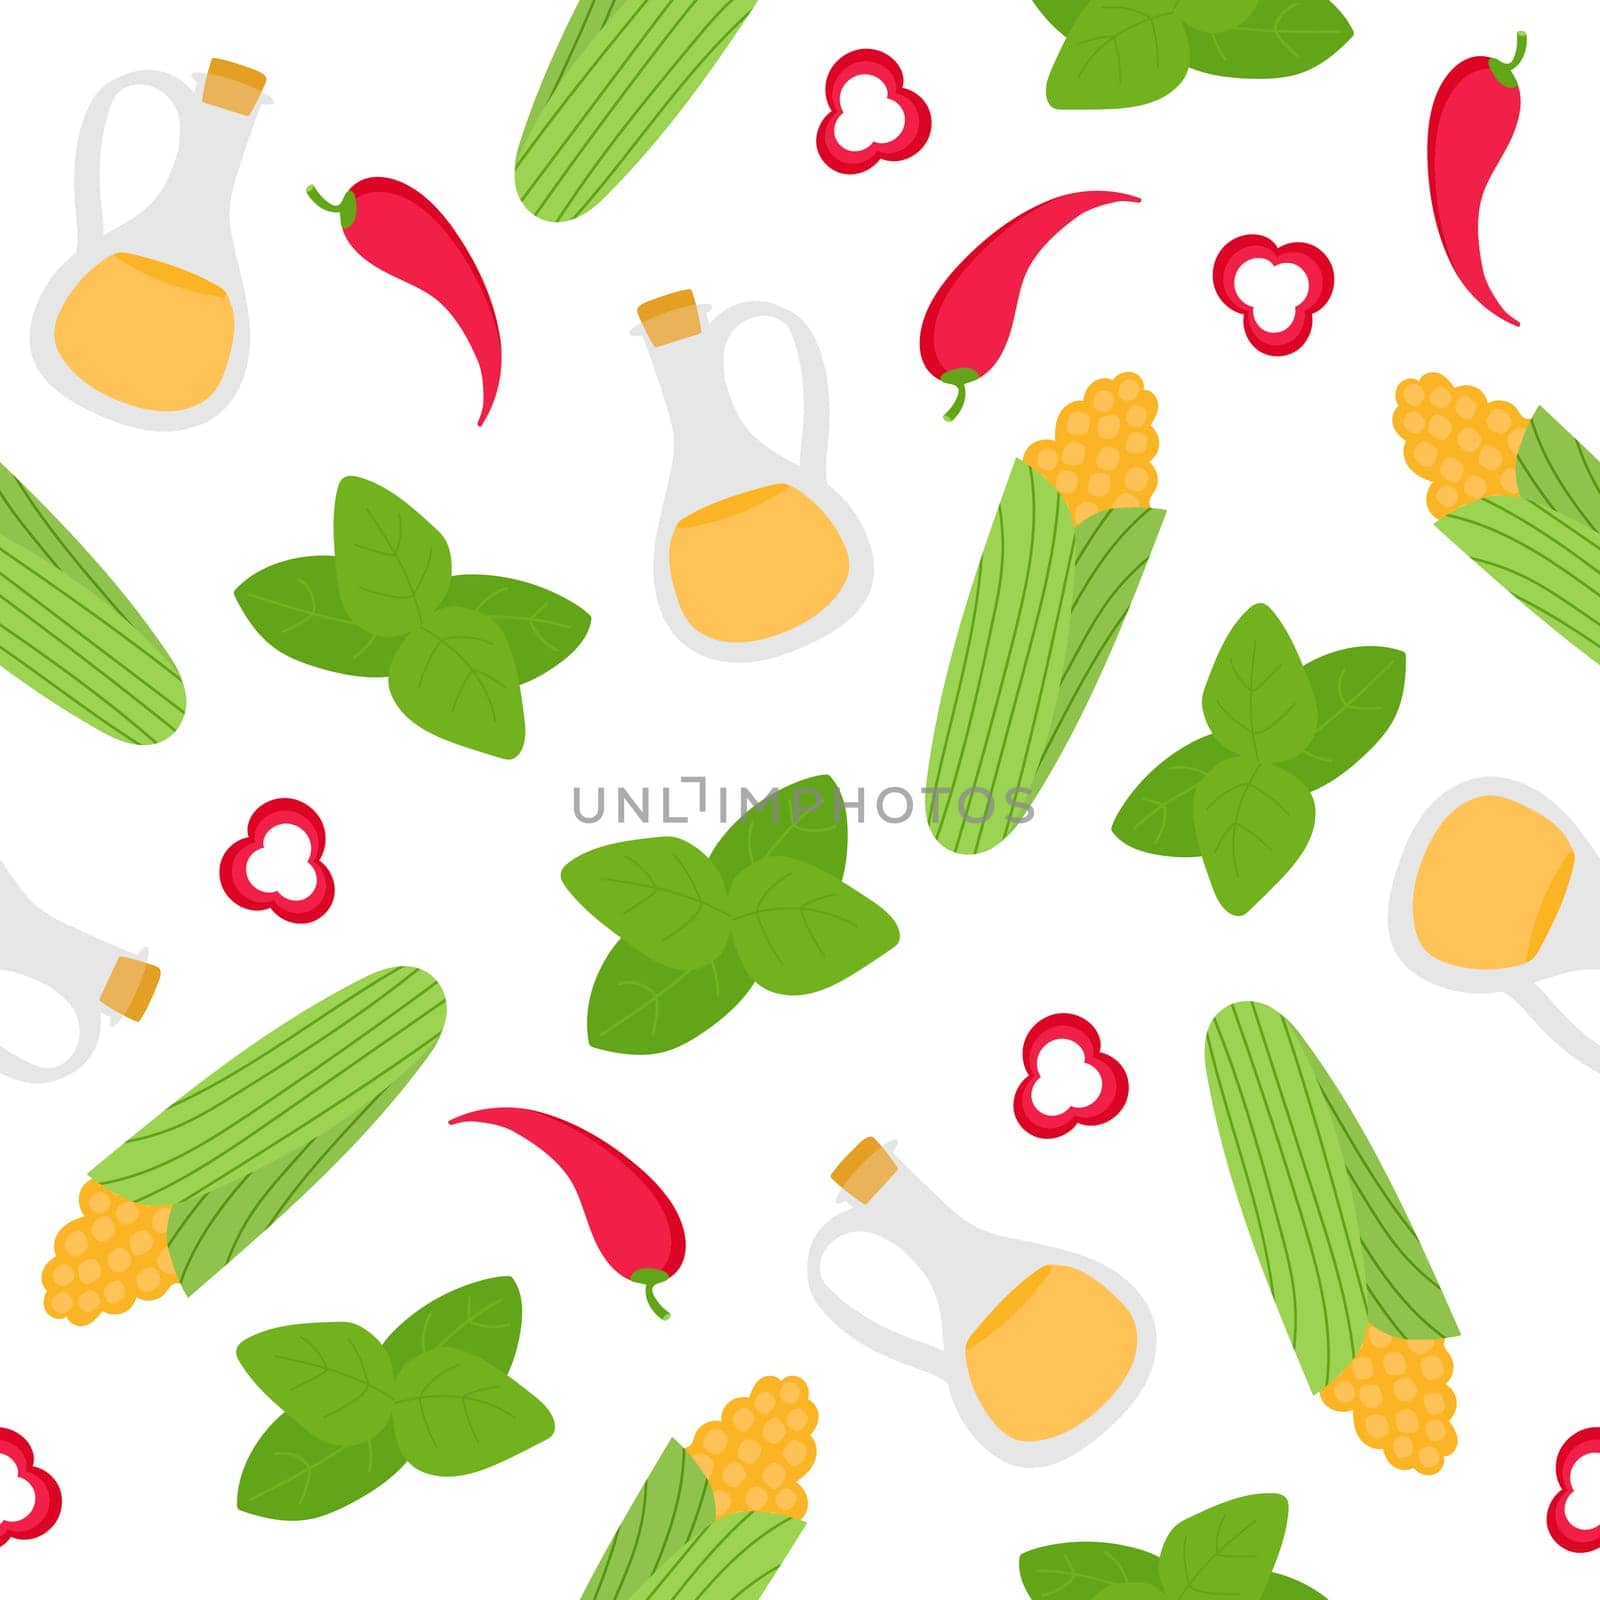 Corn, pepper, basil, oil. Ingredients for Mexican cuisine. Seamless pattern by natali_brill